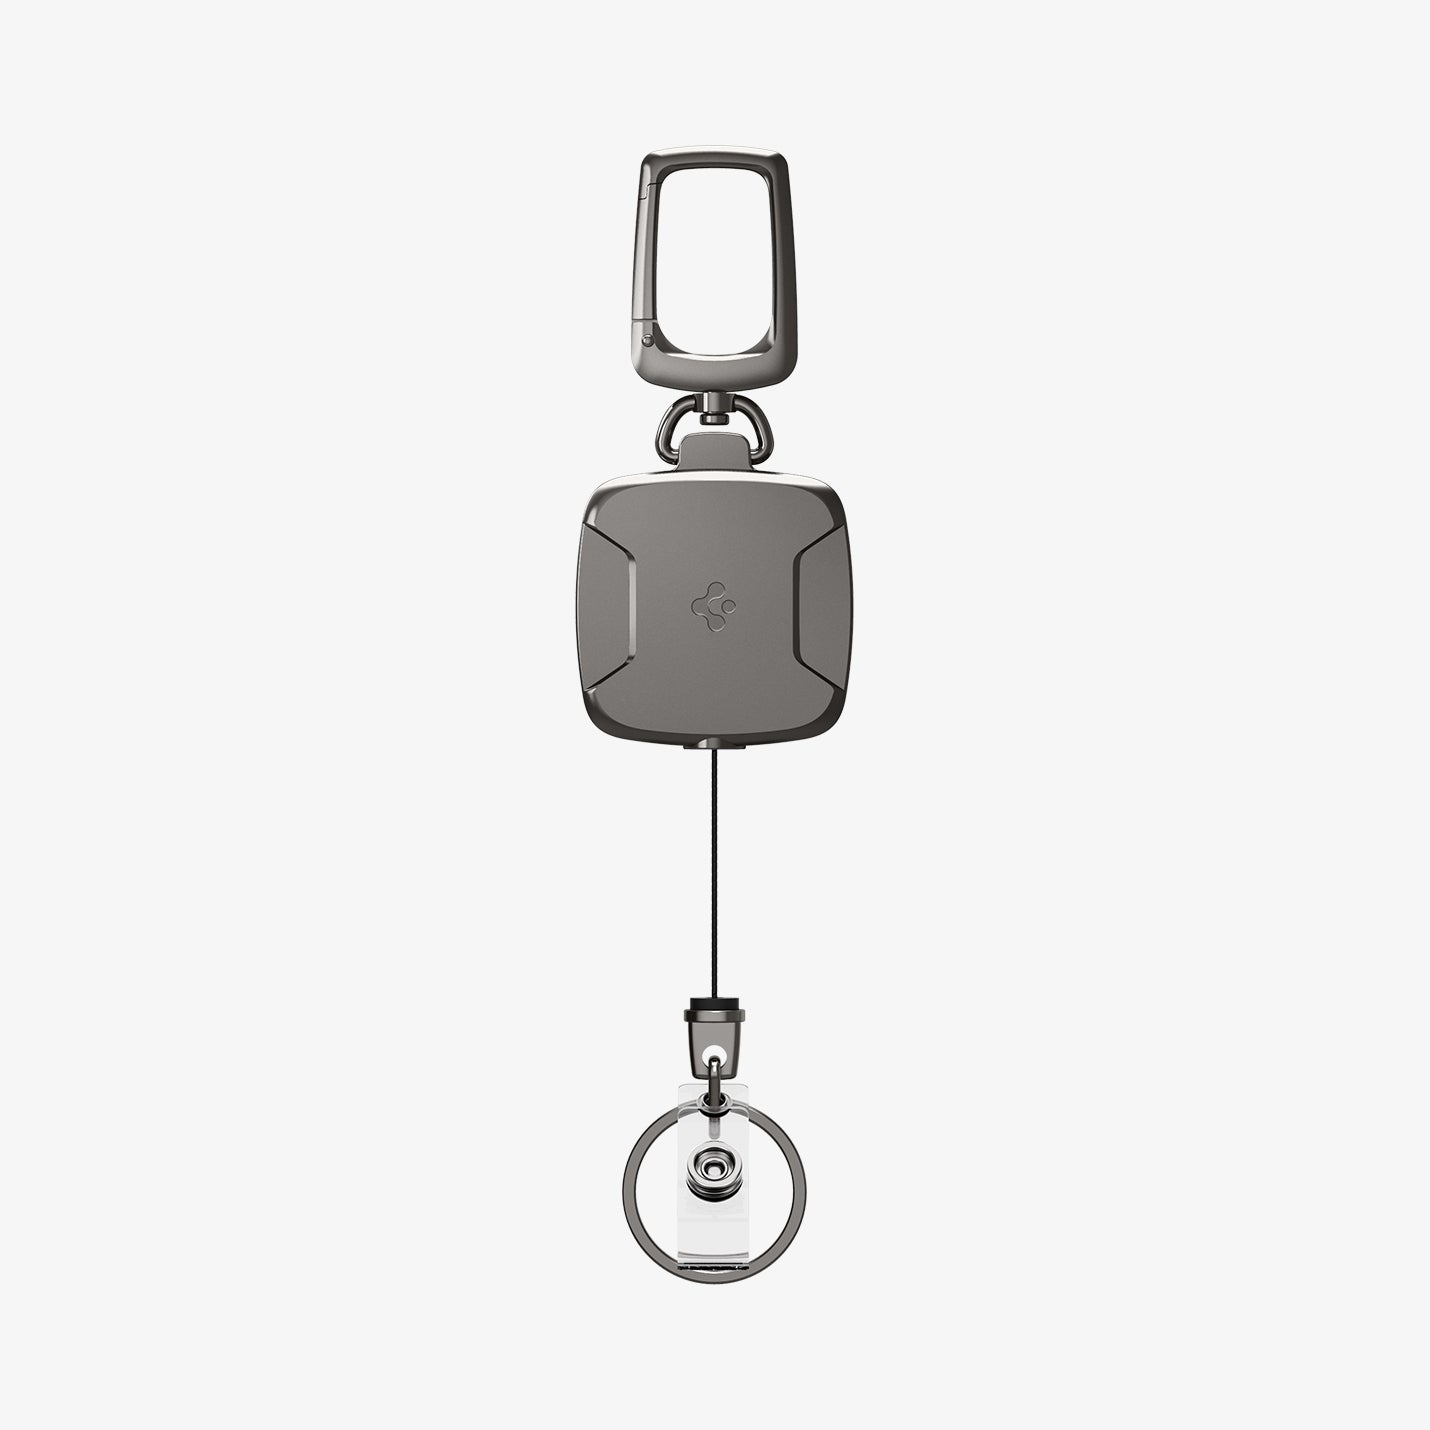 AHP03019 - Carabiner Reel Clip in black showing the front with reel clip extended out